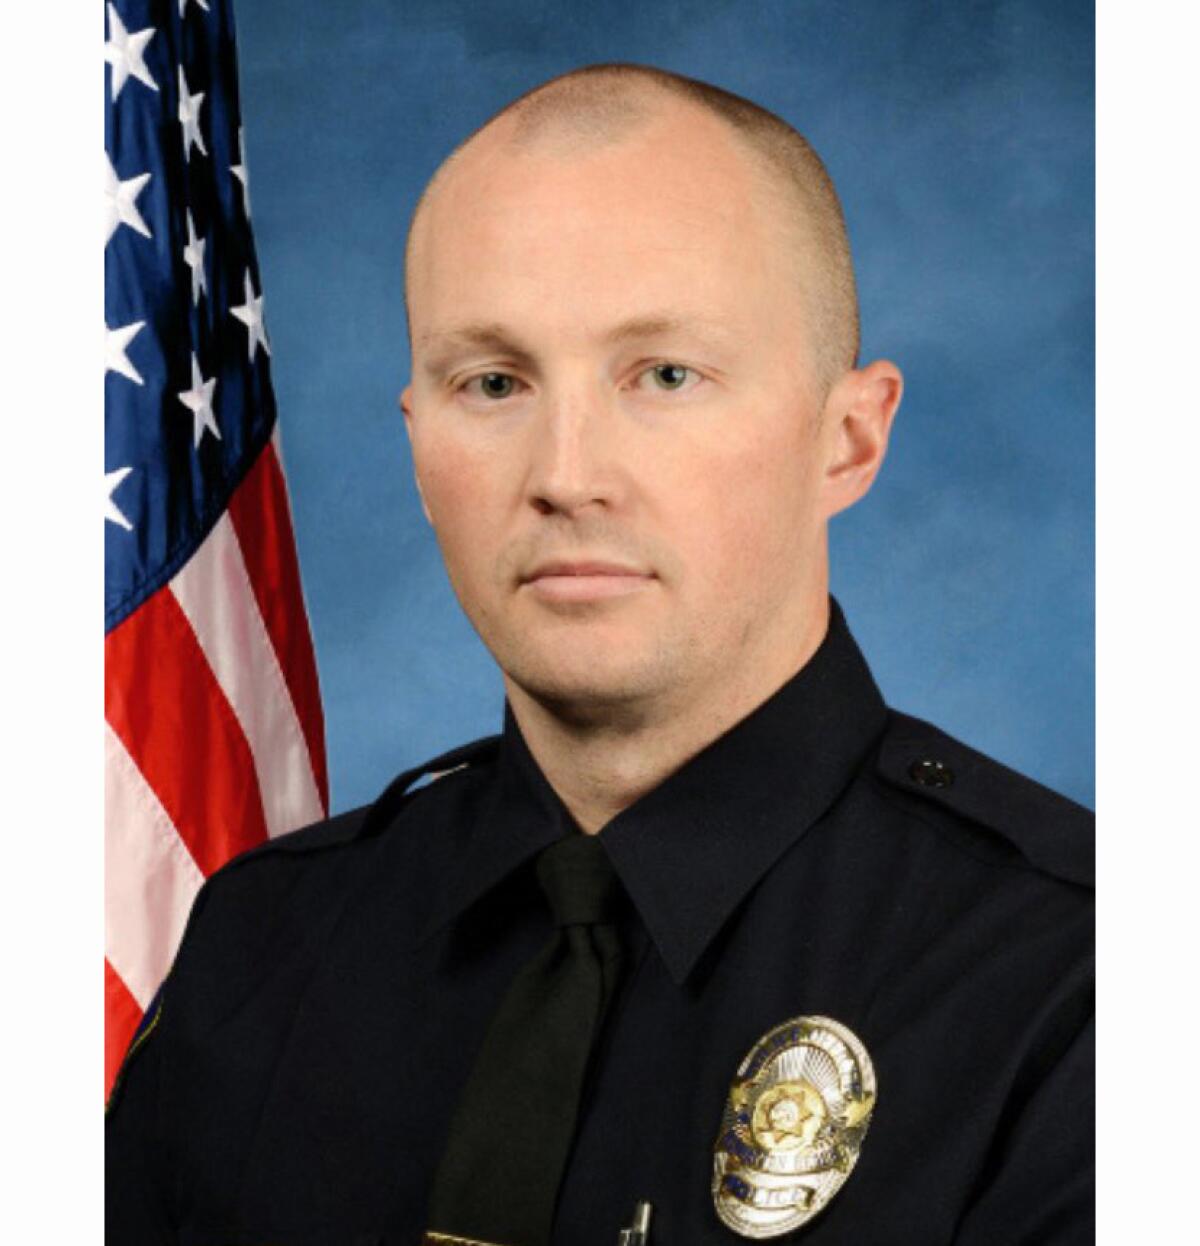 Chad Swanson, a Manhattan Beach police motorcycle officer, was killed in an on-duty traffic collision on the 405 Freeway.